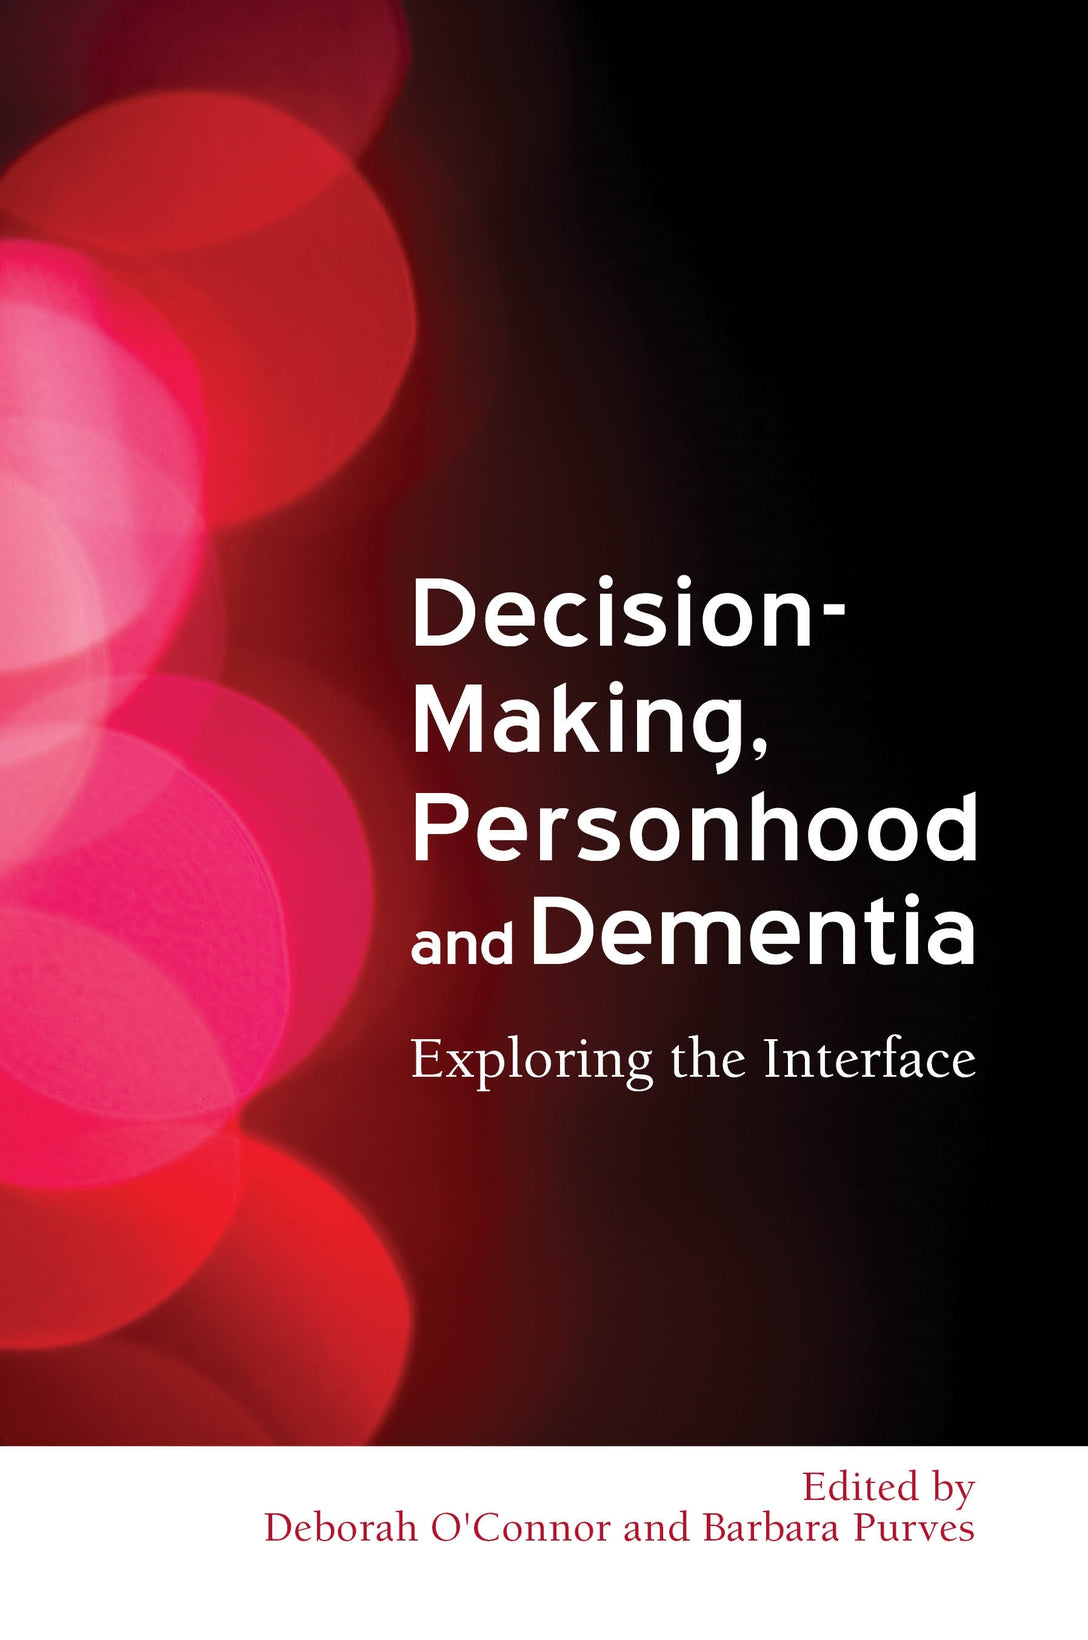 Decision-Making, Personhood and Dementia by Deborah O'Connor, Barbara Purves